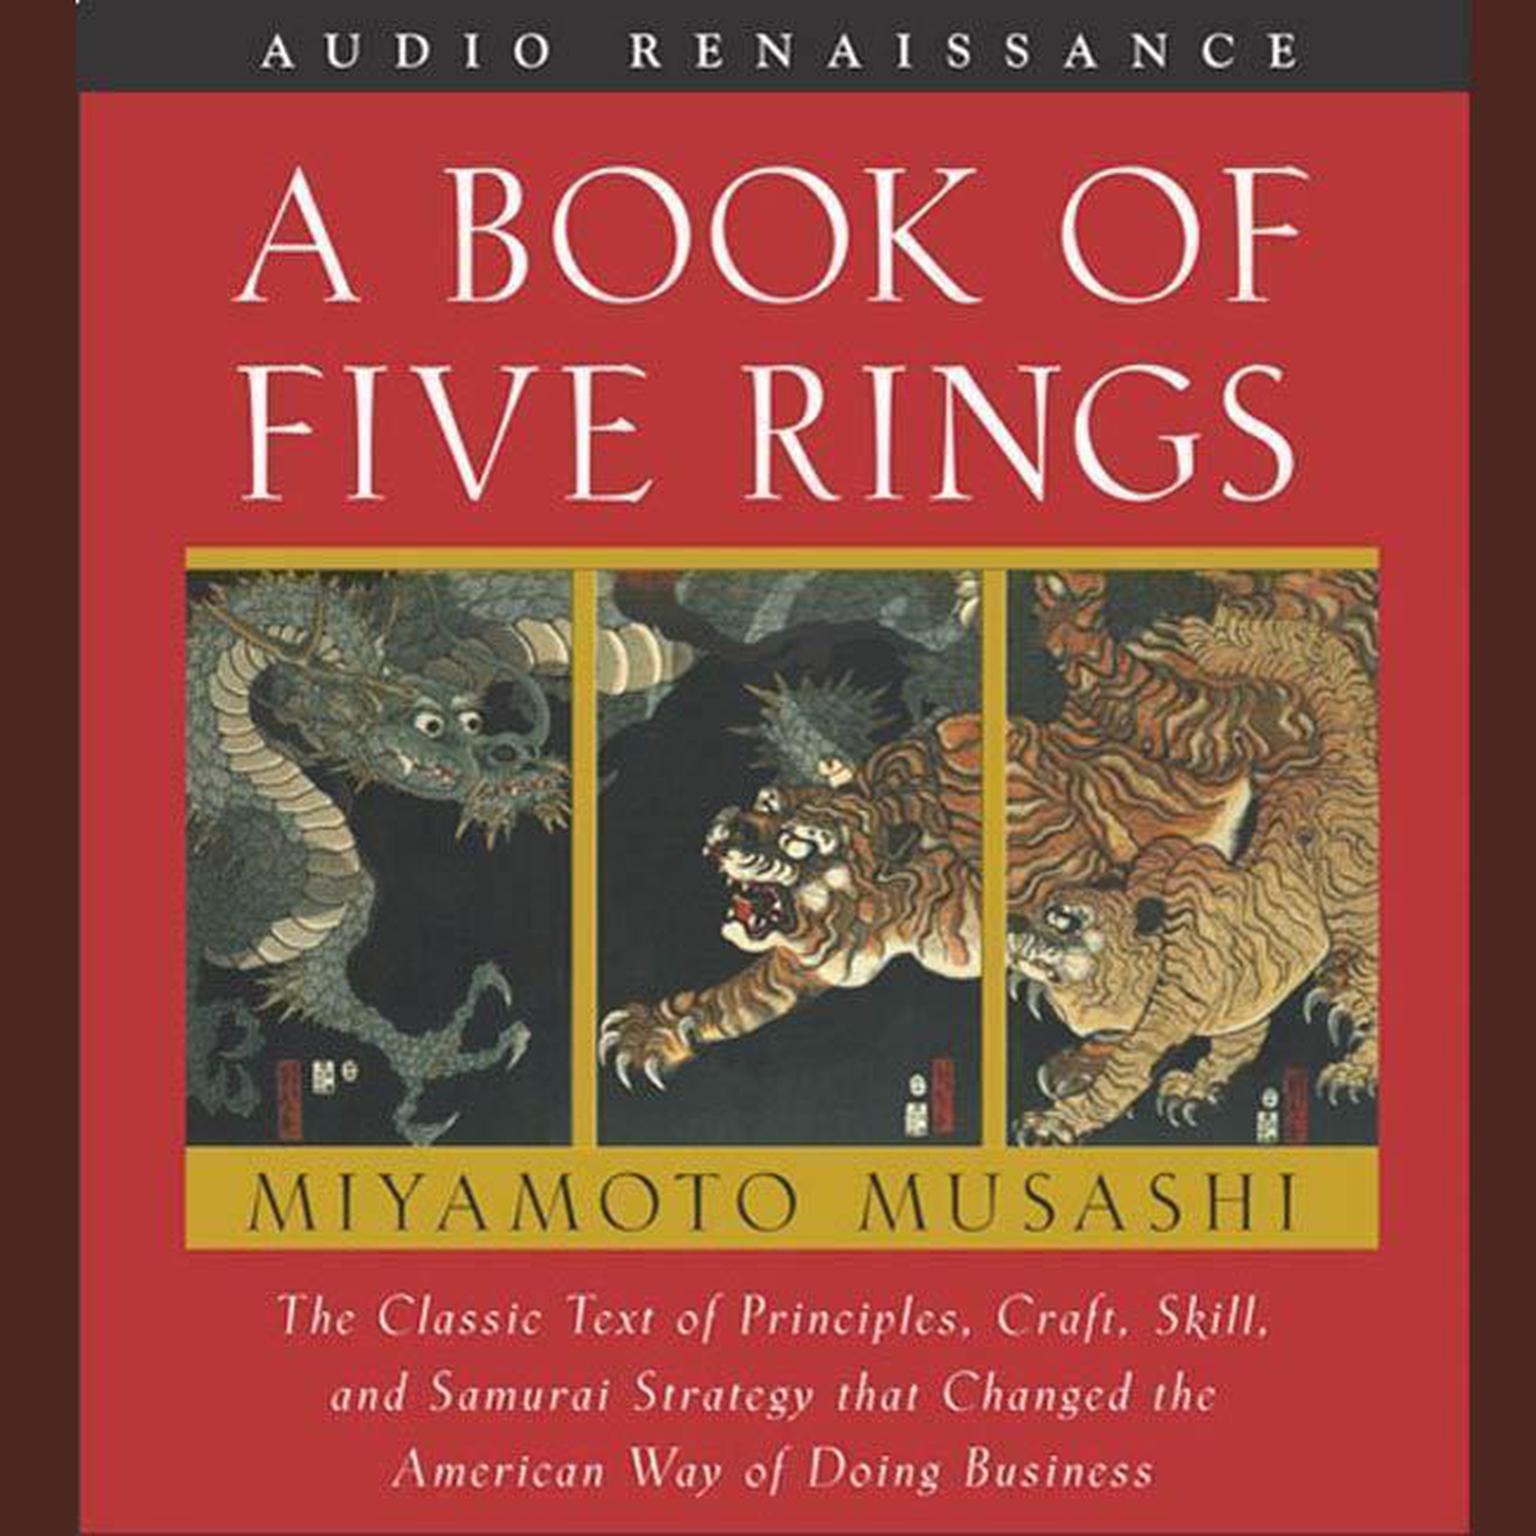 A Book of Five Rings (Abridged): The Classic Text of Principles, Craft, Skill and Samurai Strategy that Changed the American Way of Doing Business Audiobook, by Miyamoto Musashi